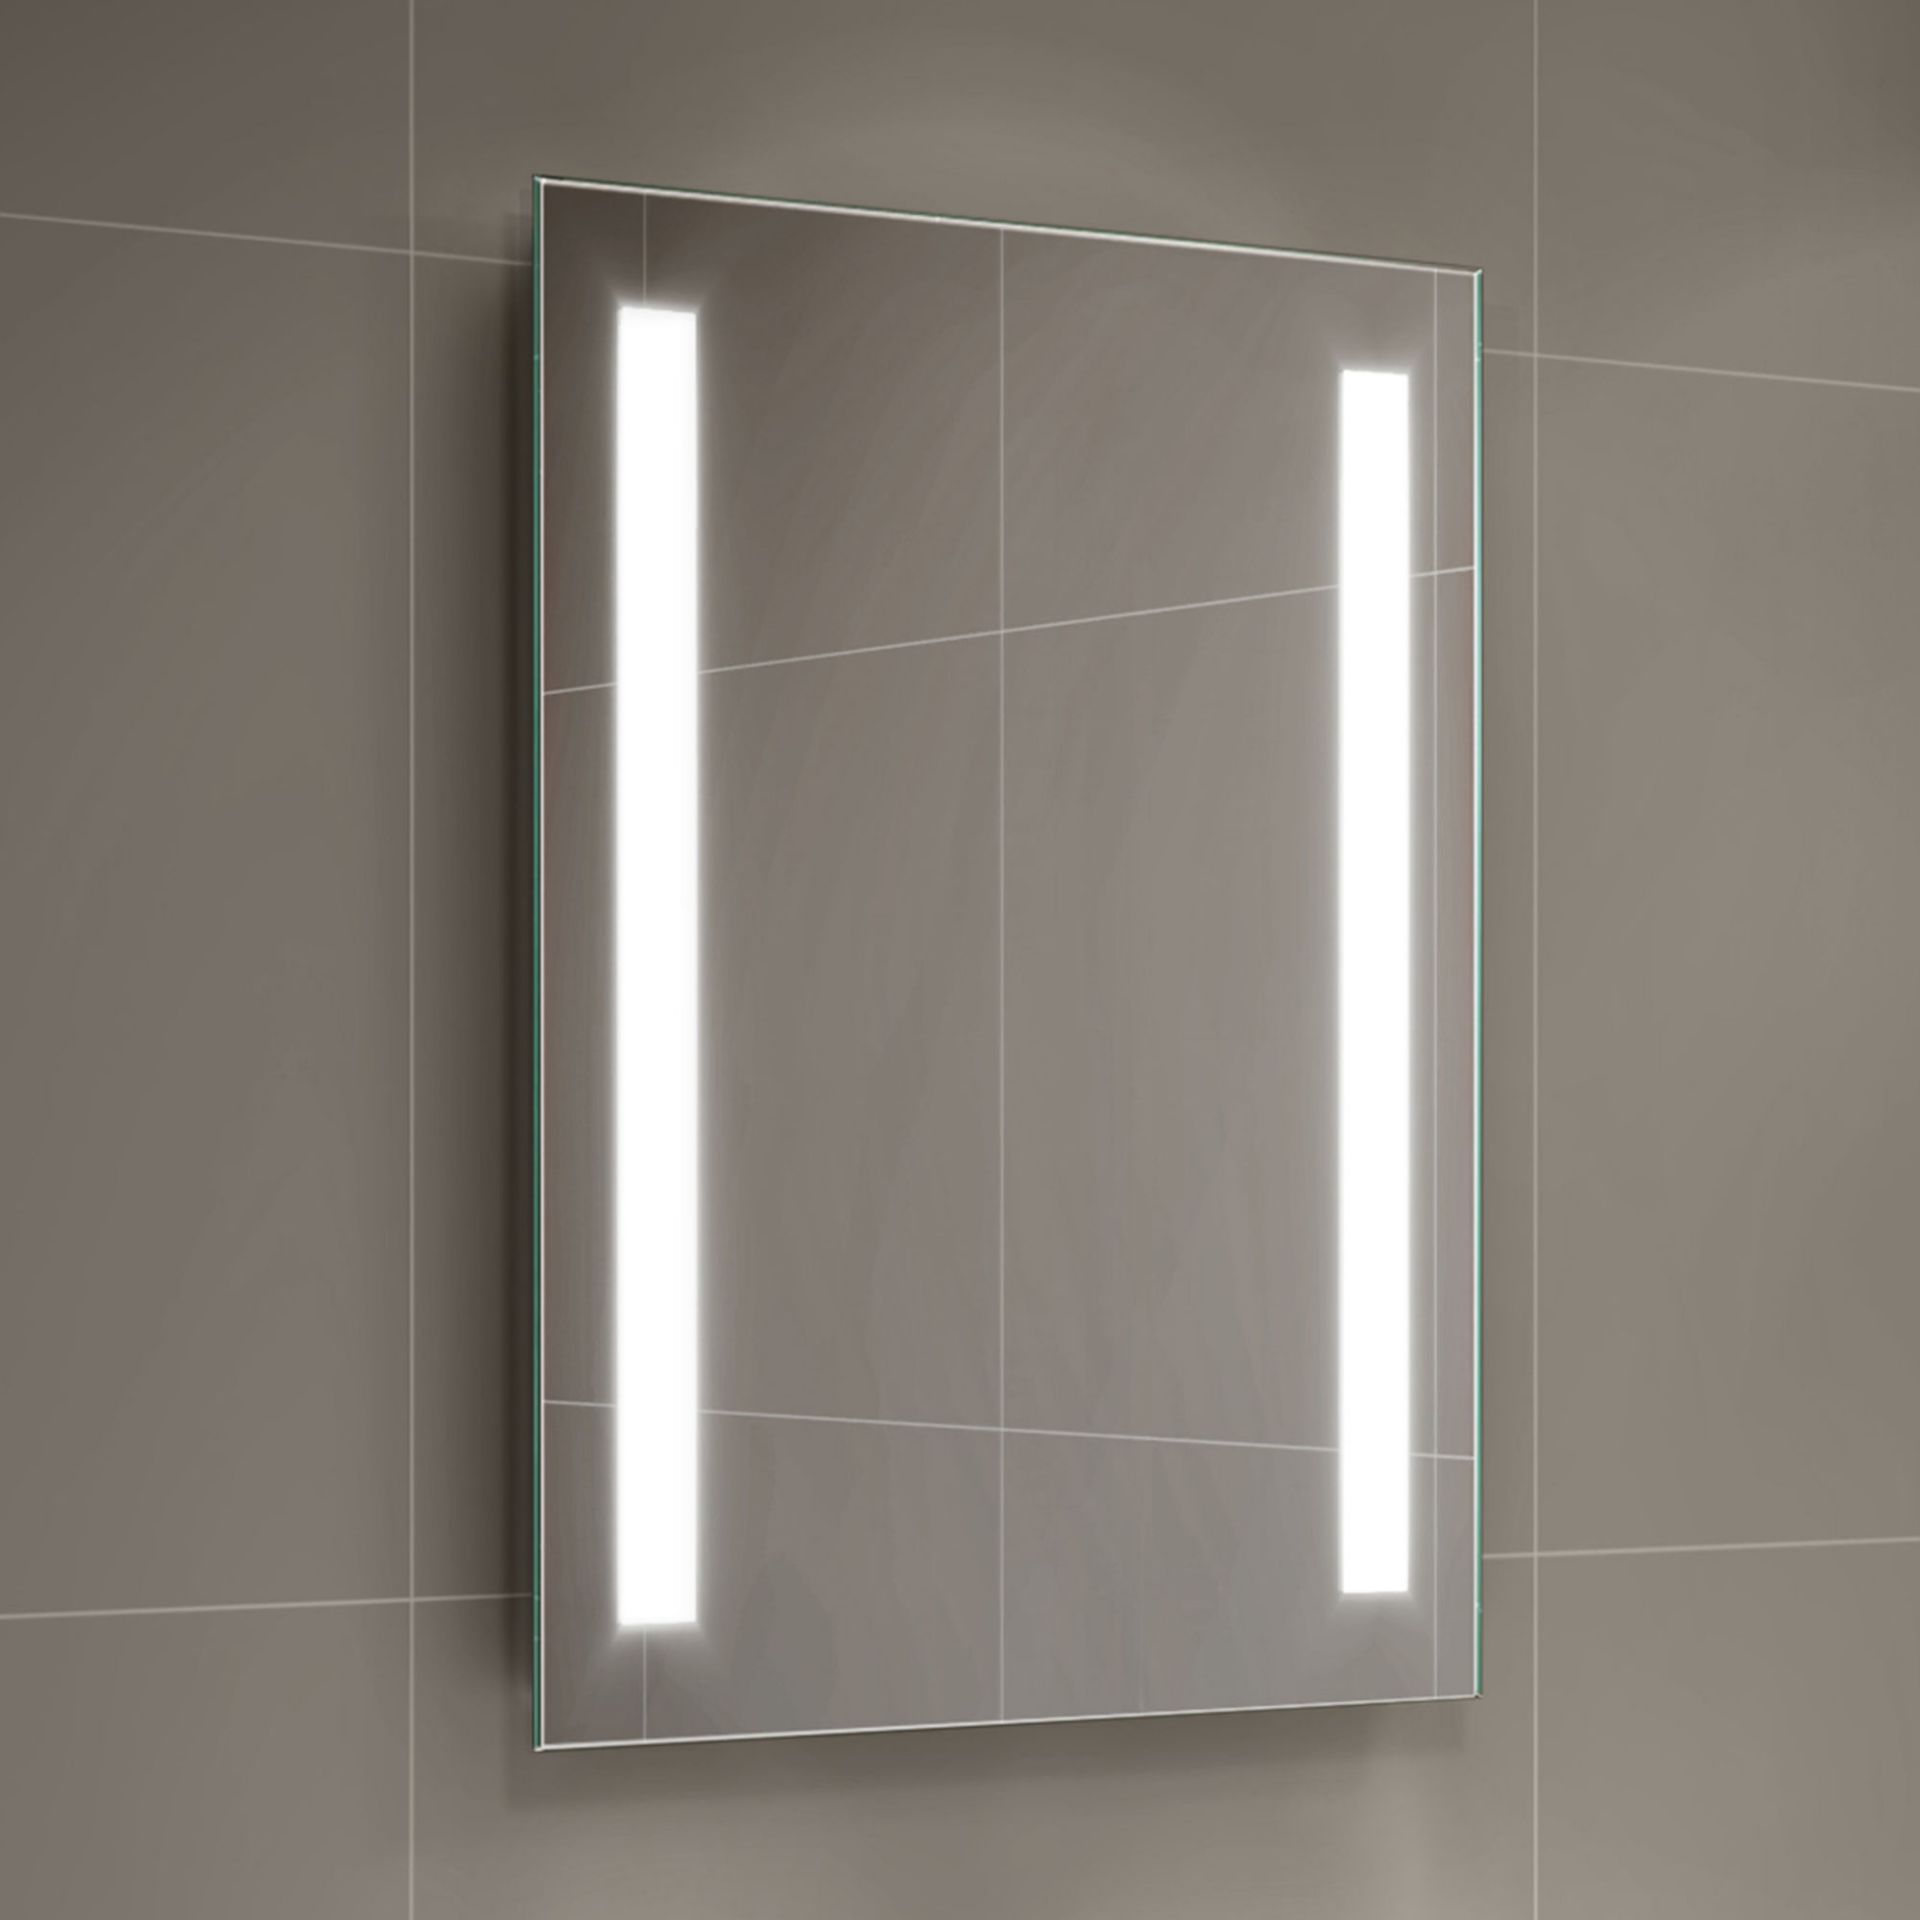 (PT240) 500x700mm Omega Illuminated LED Mirror - Battery Operated. Energy saving controlled On / Off